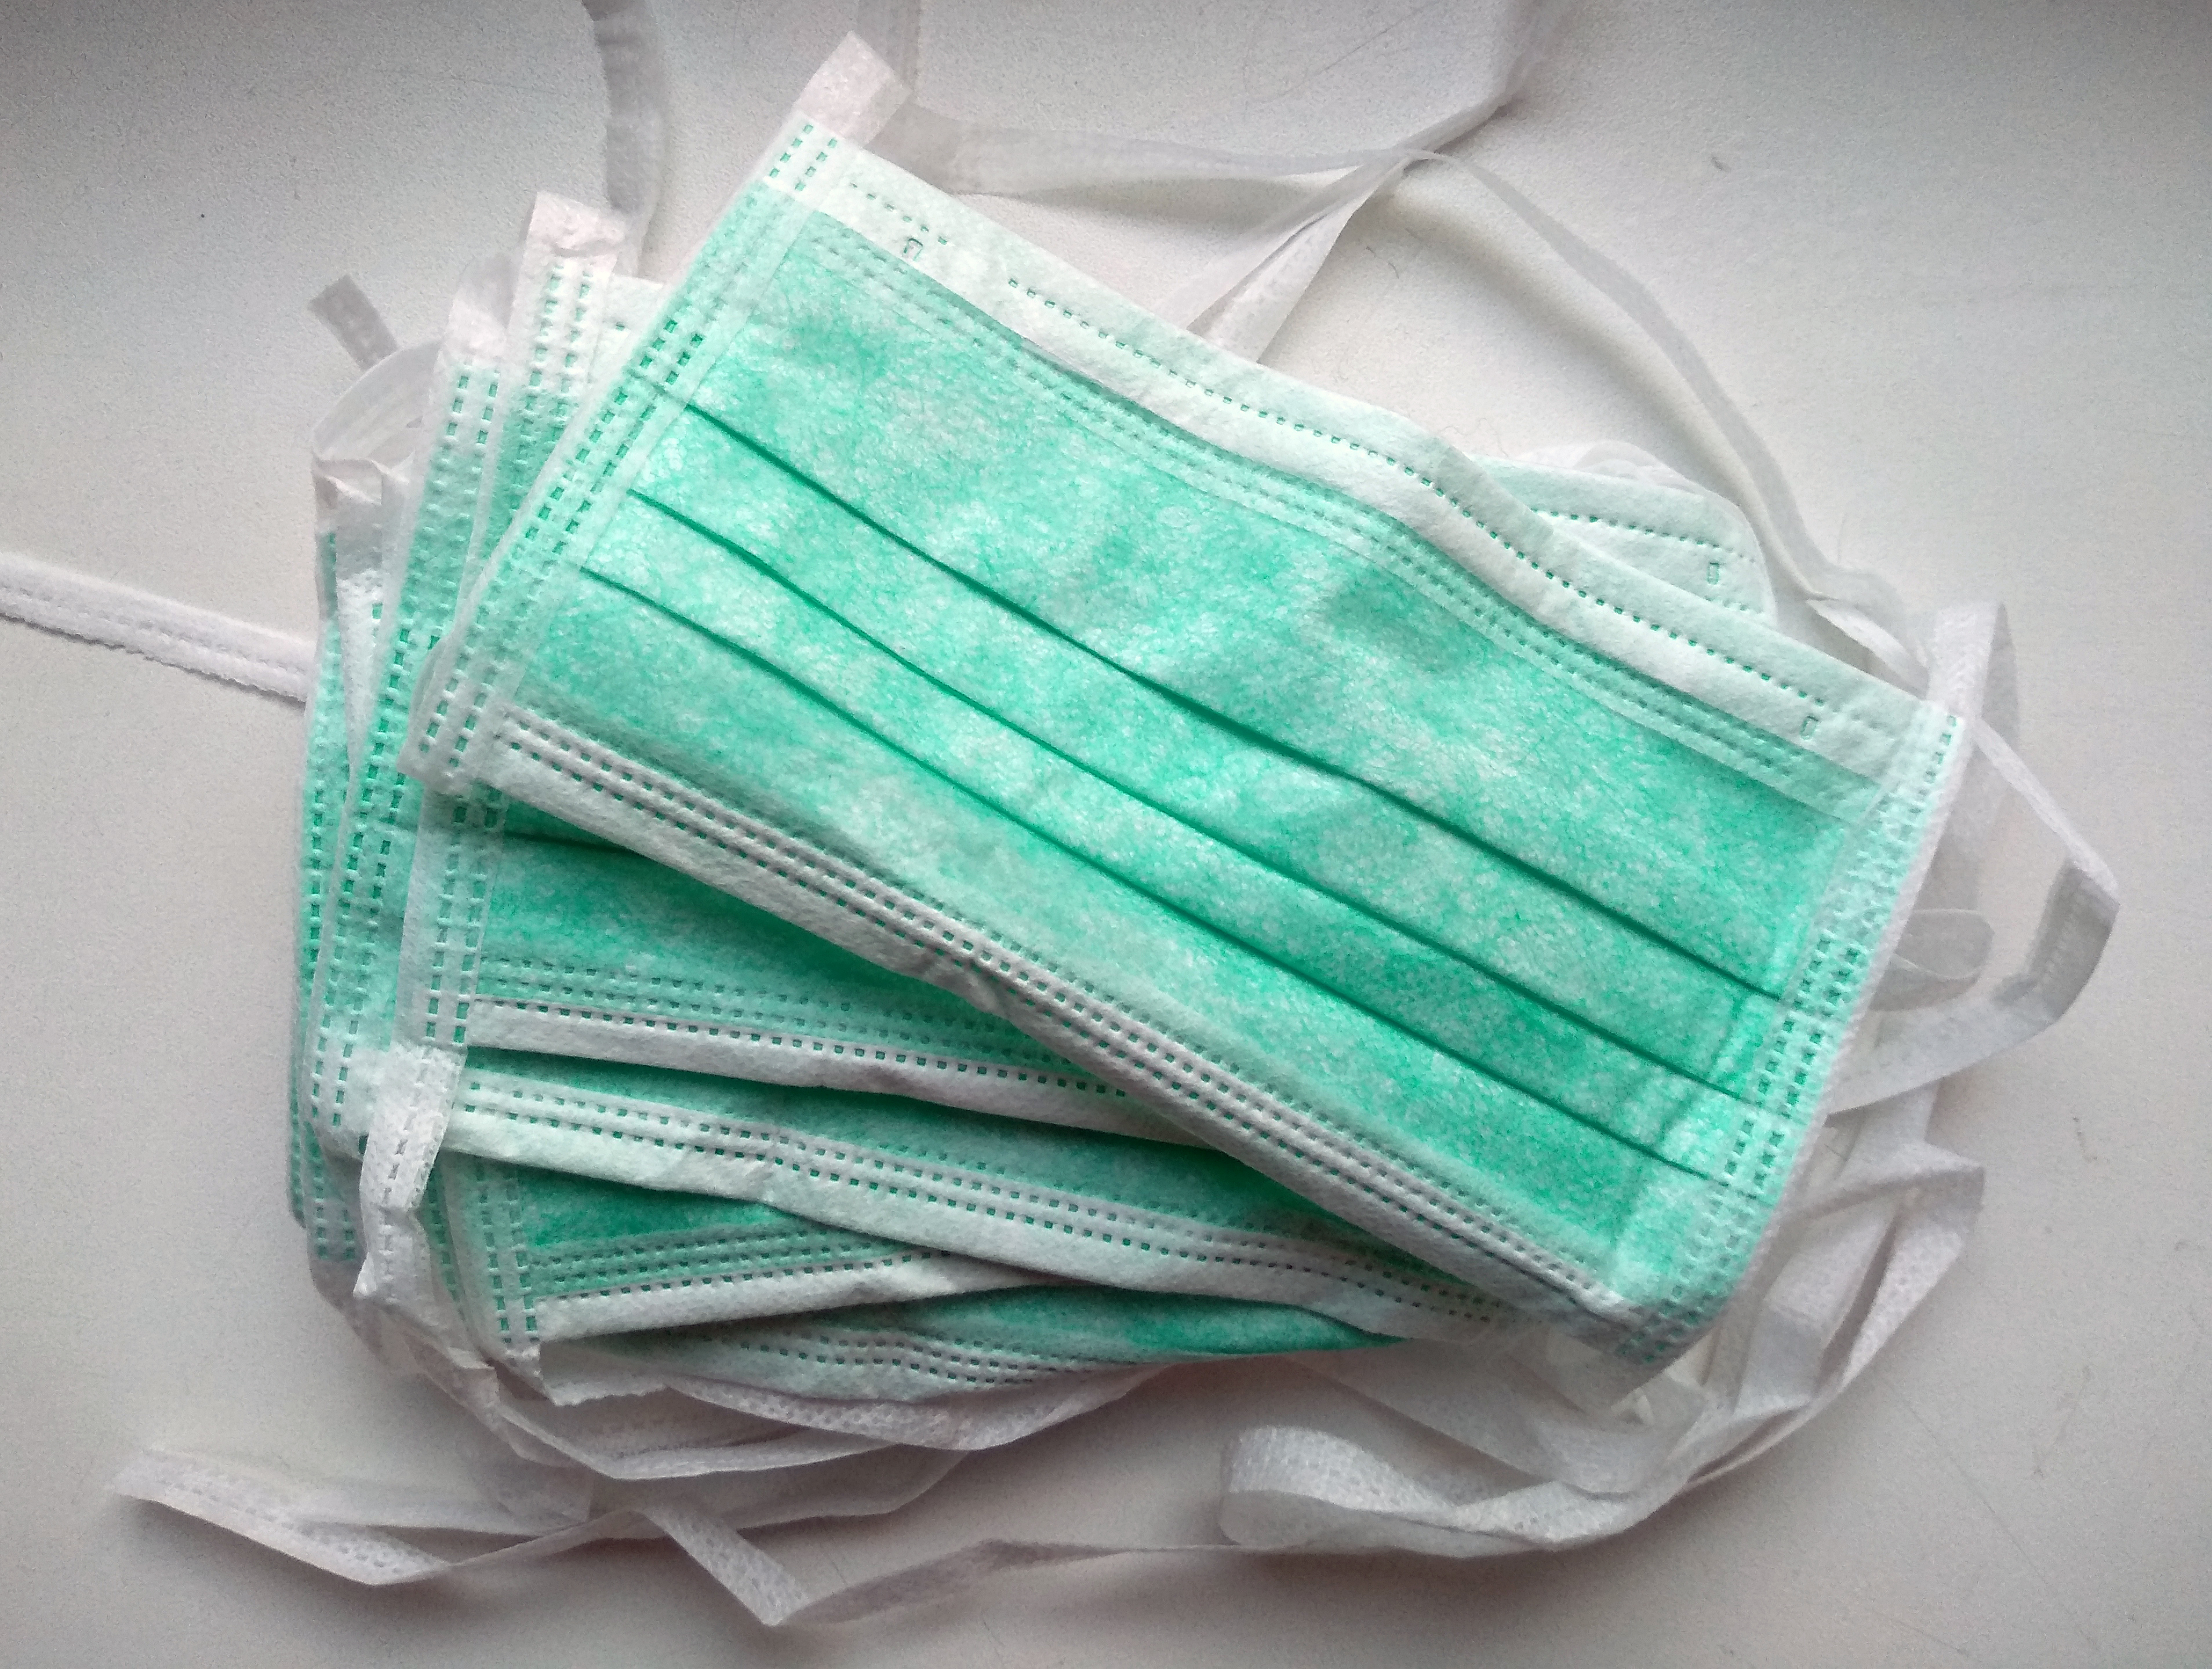 Face_Masks_used_to_prevent_the_spread_of_Coronavirus_and_other_diseases